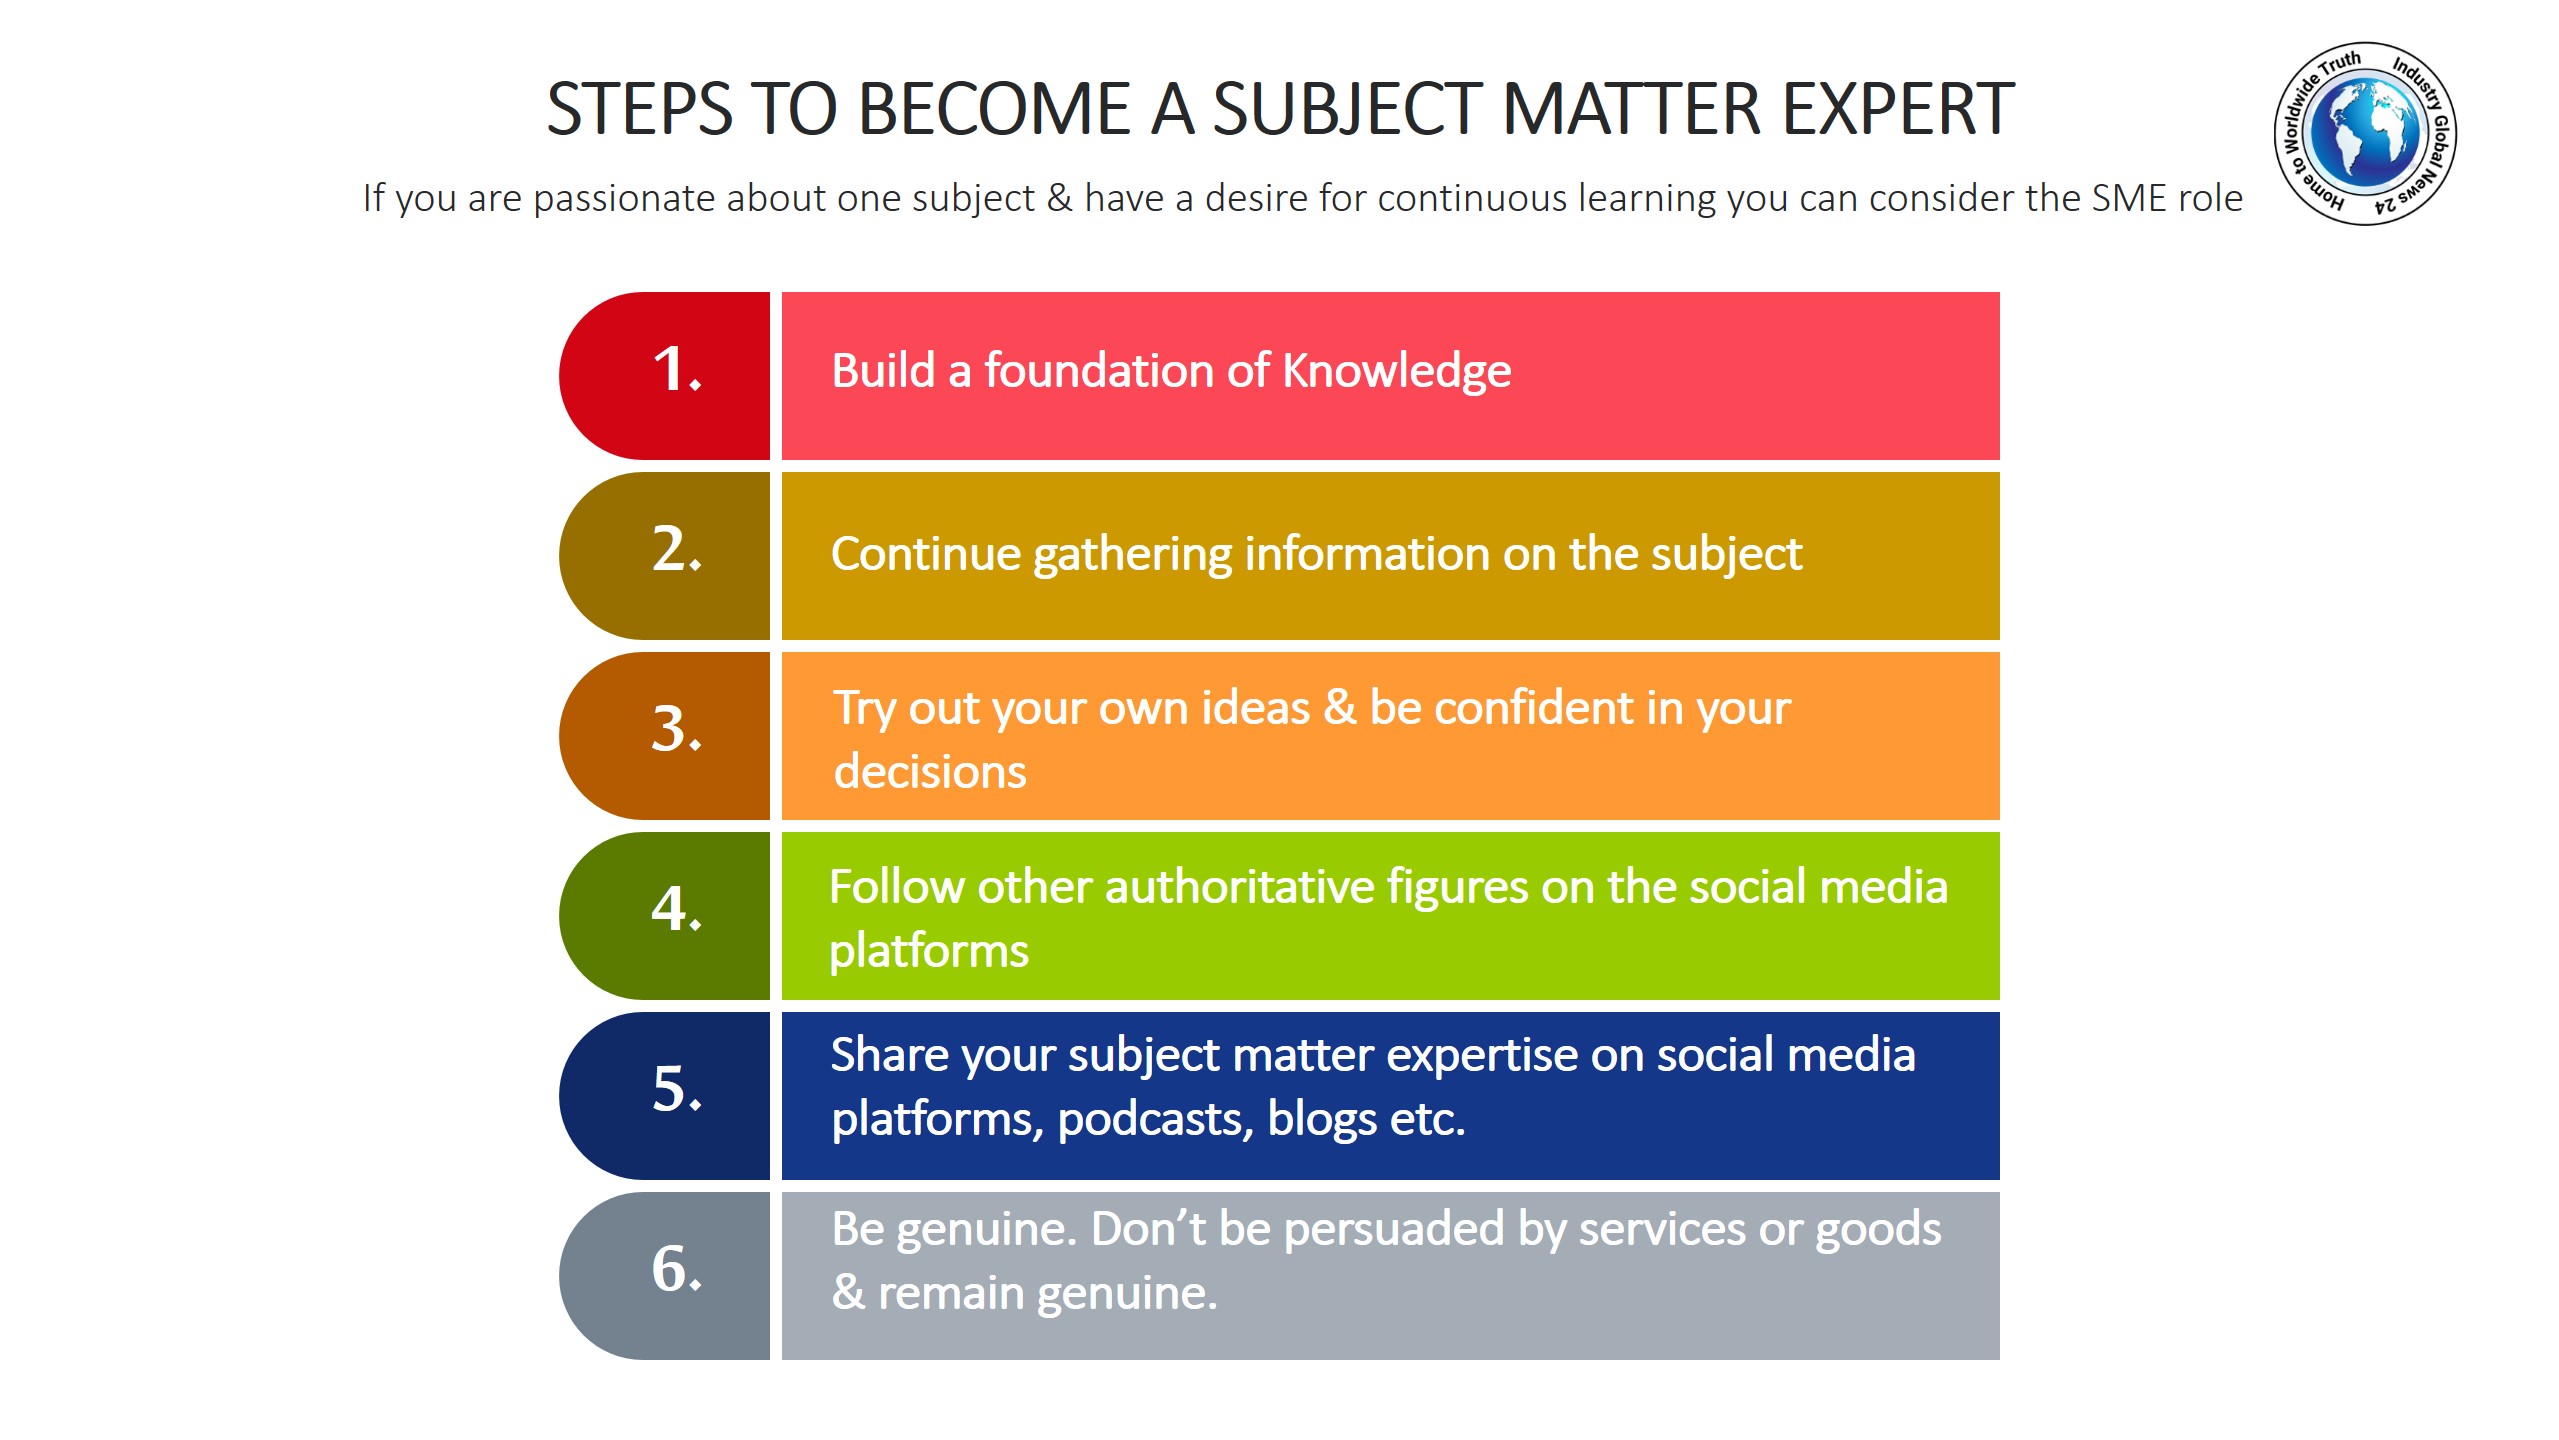 Steps to become a Subject Matter Expert